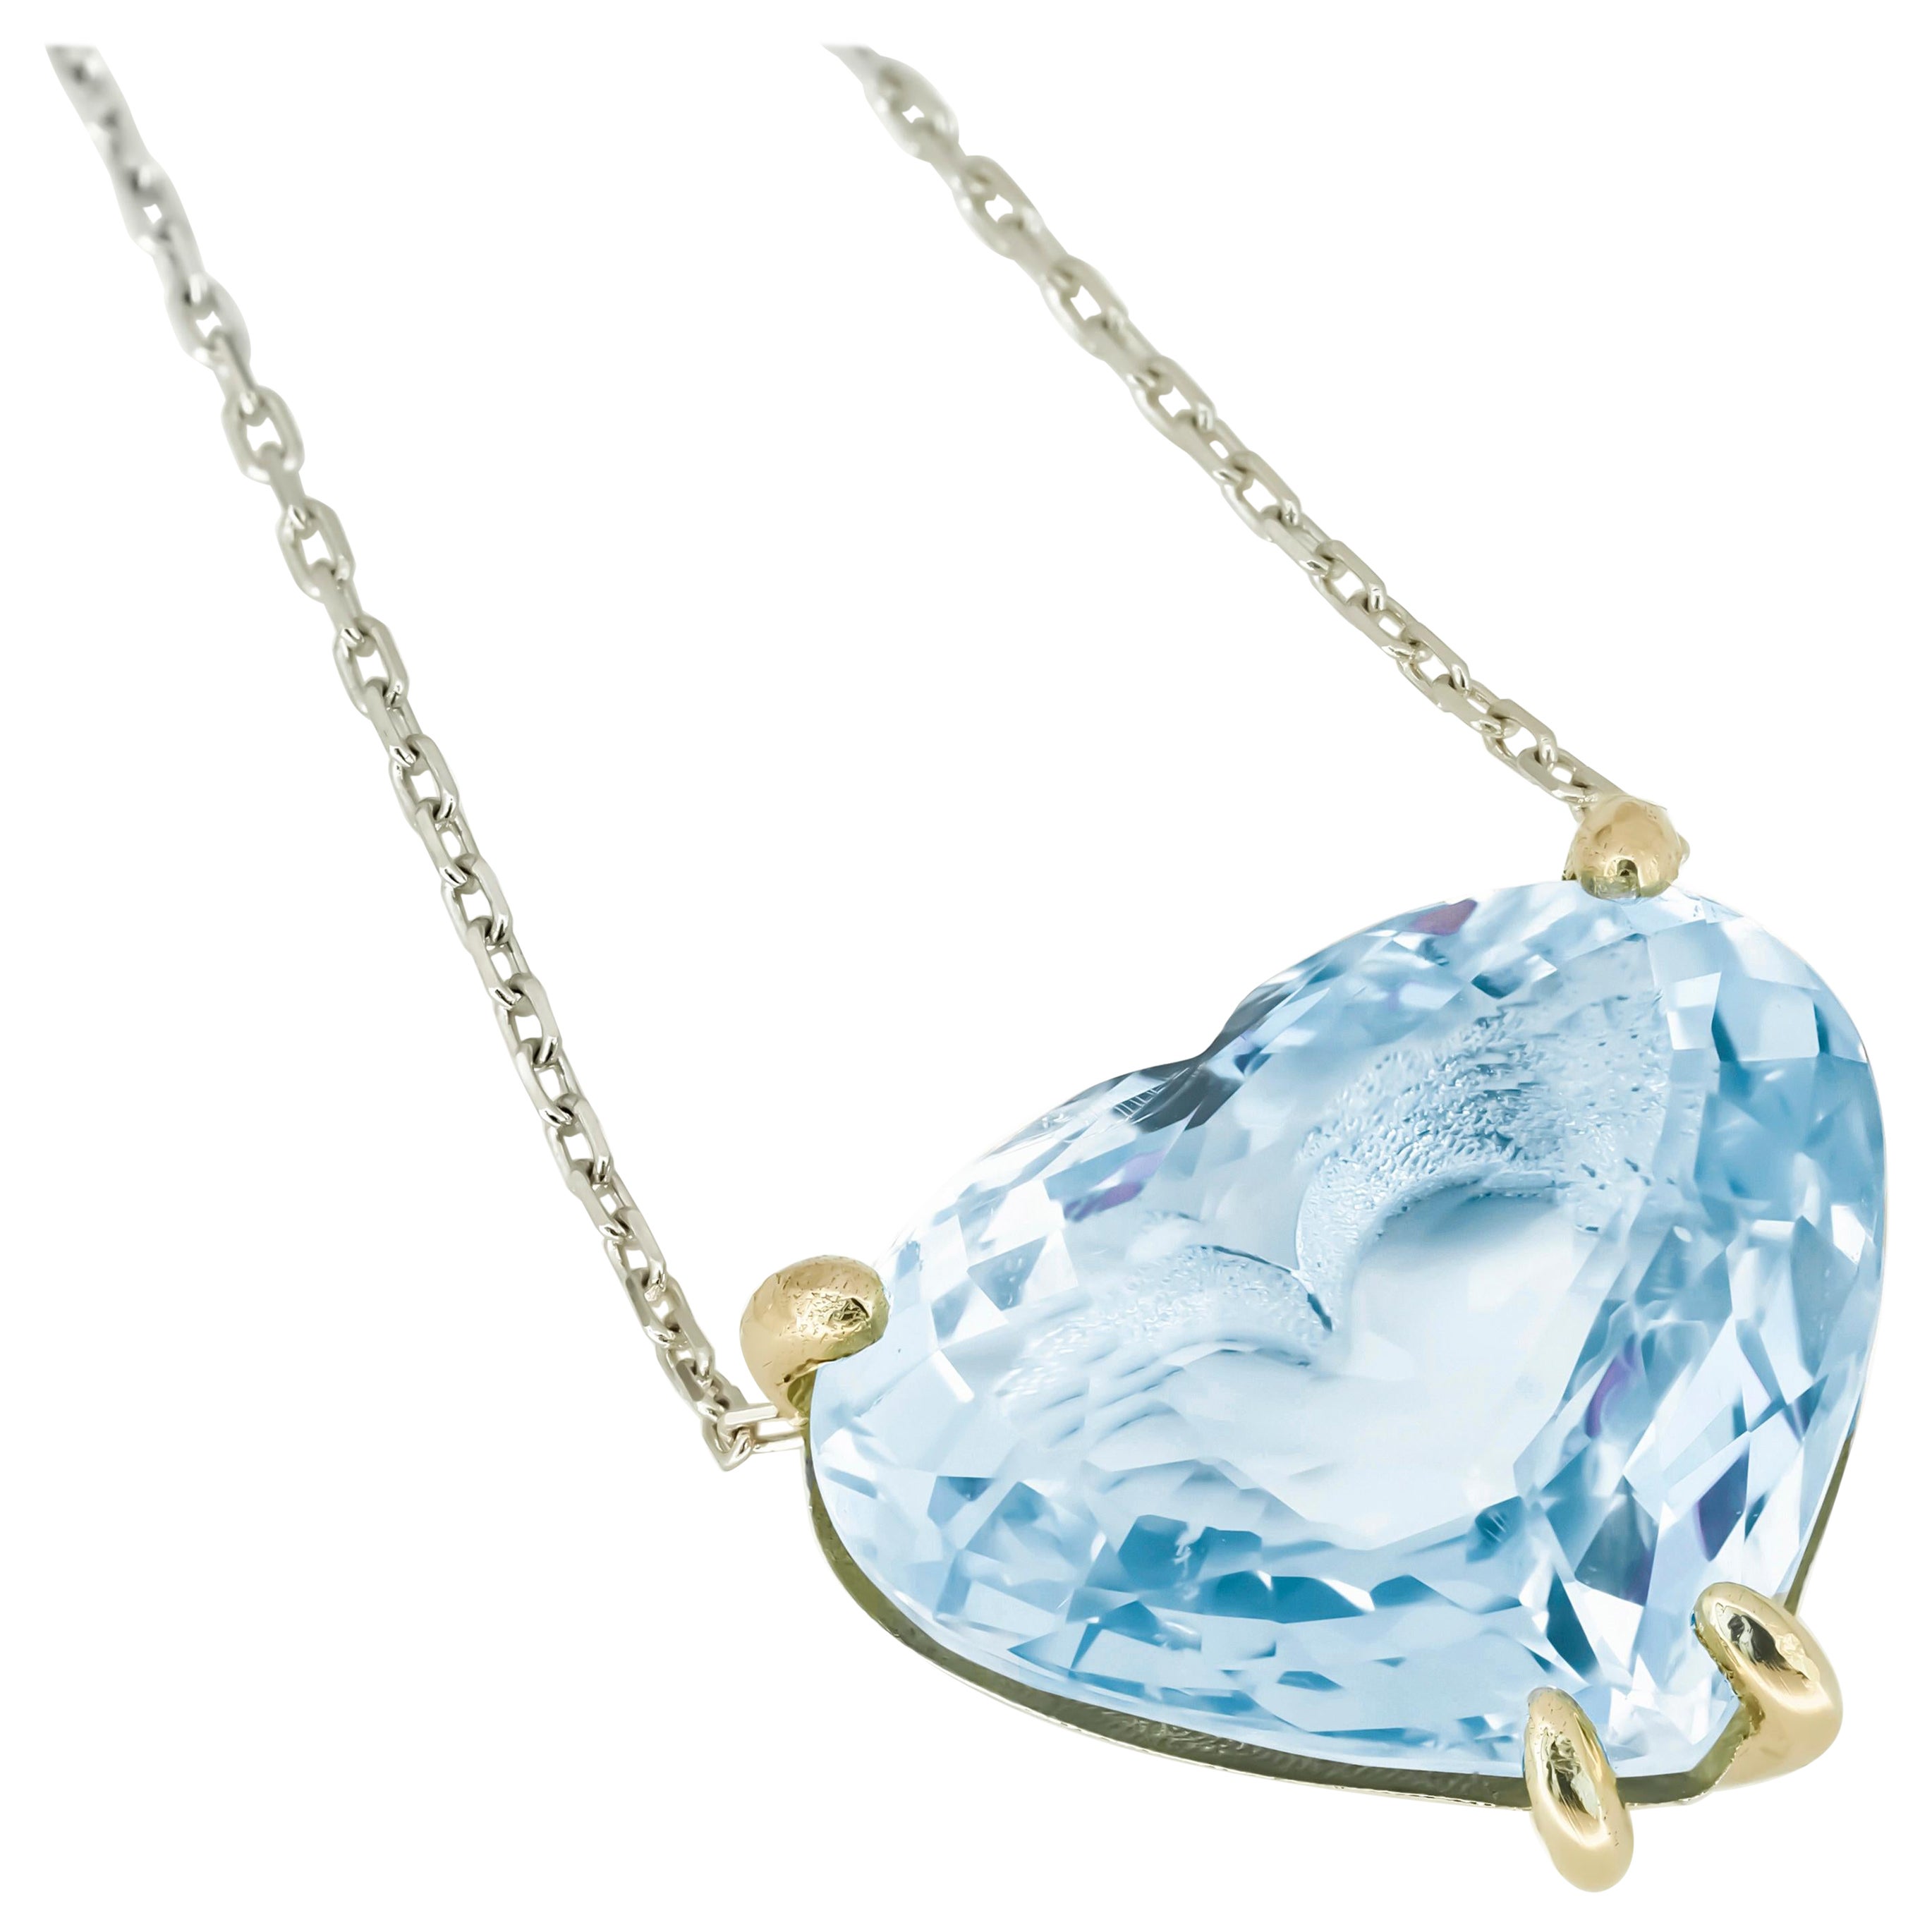 Heart shaped topaz pendant necklace in 14k gold.  For Sale